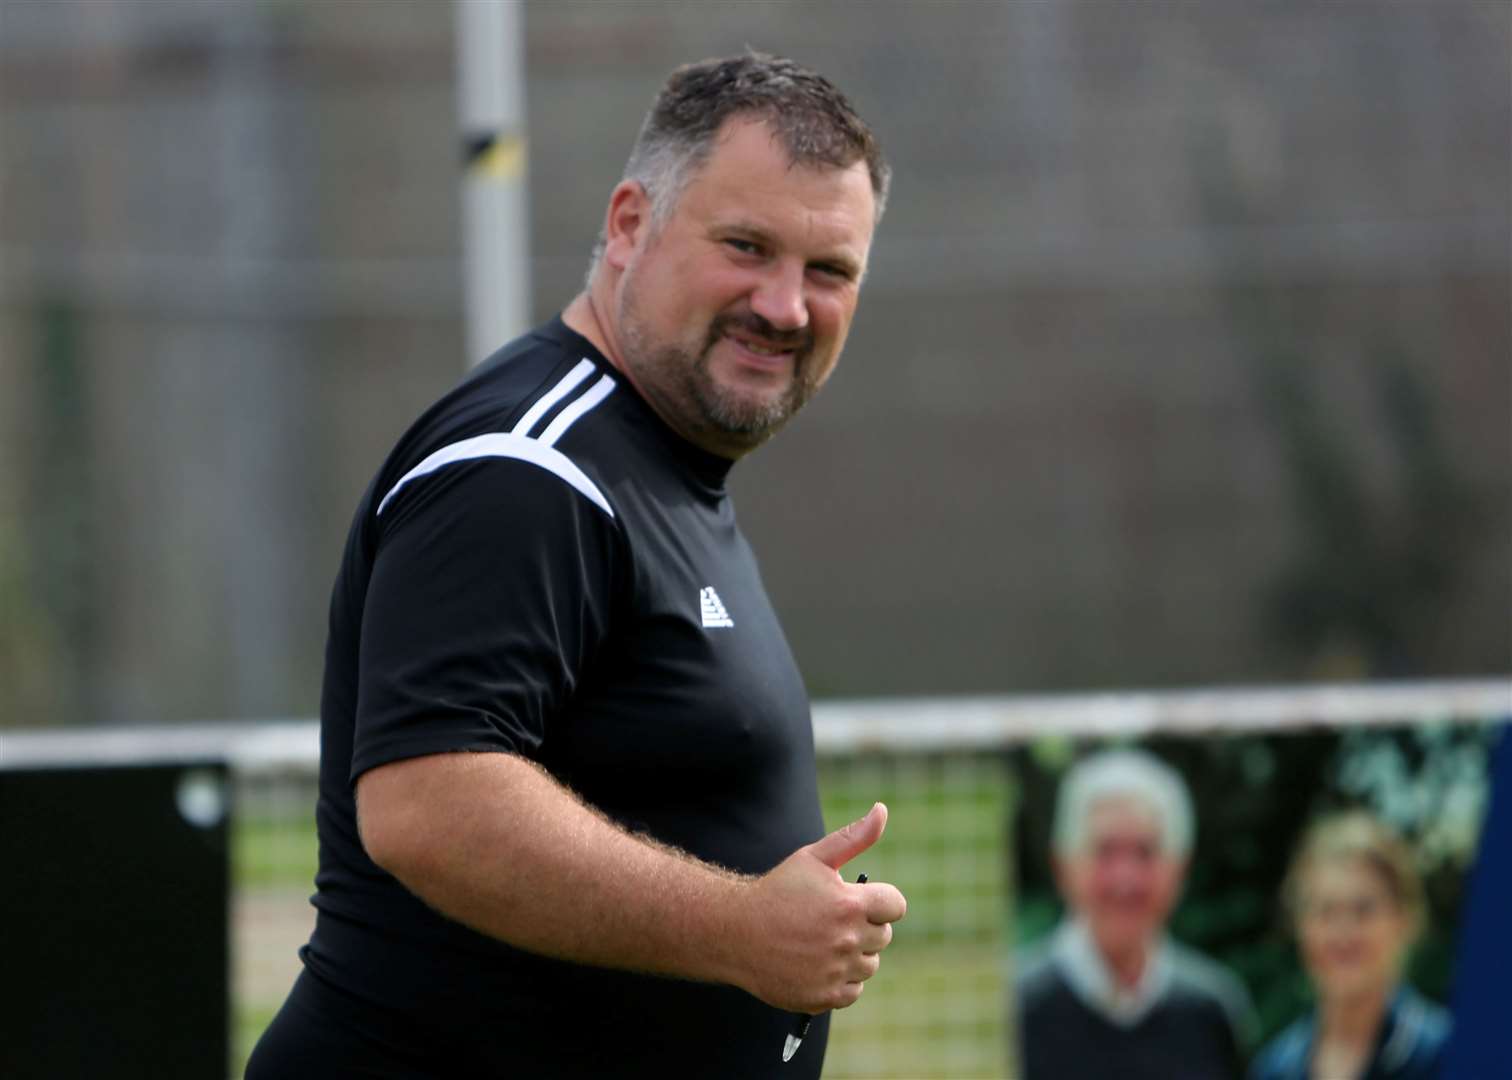 Deal Town manager Steve King has enjoyed some big wins recently over top sides Picture: Paul Willmott